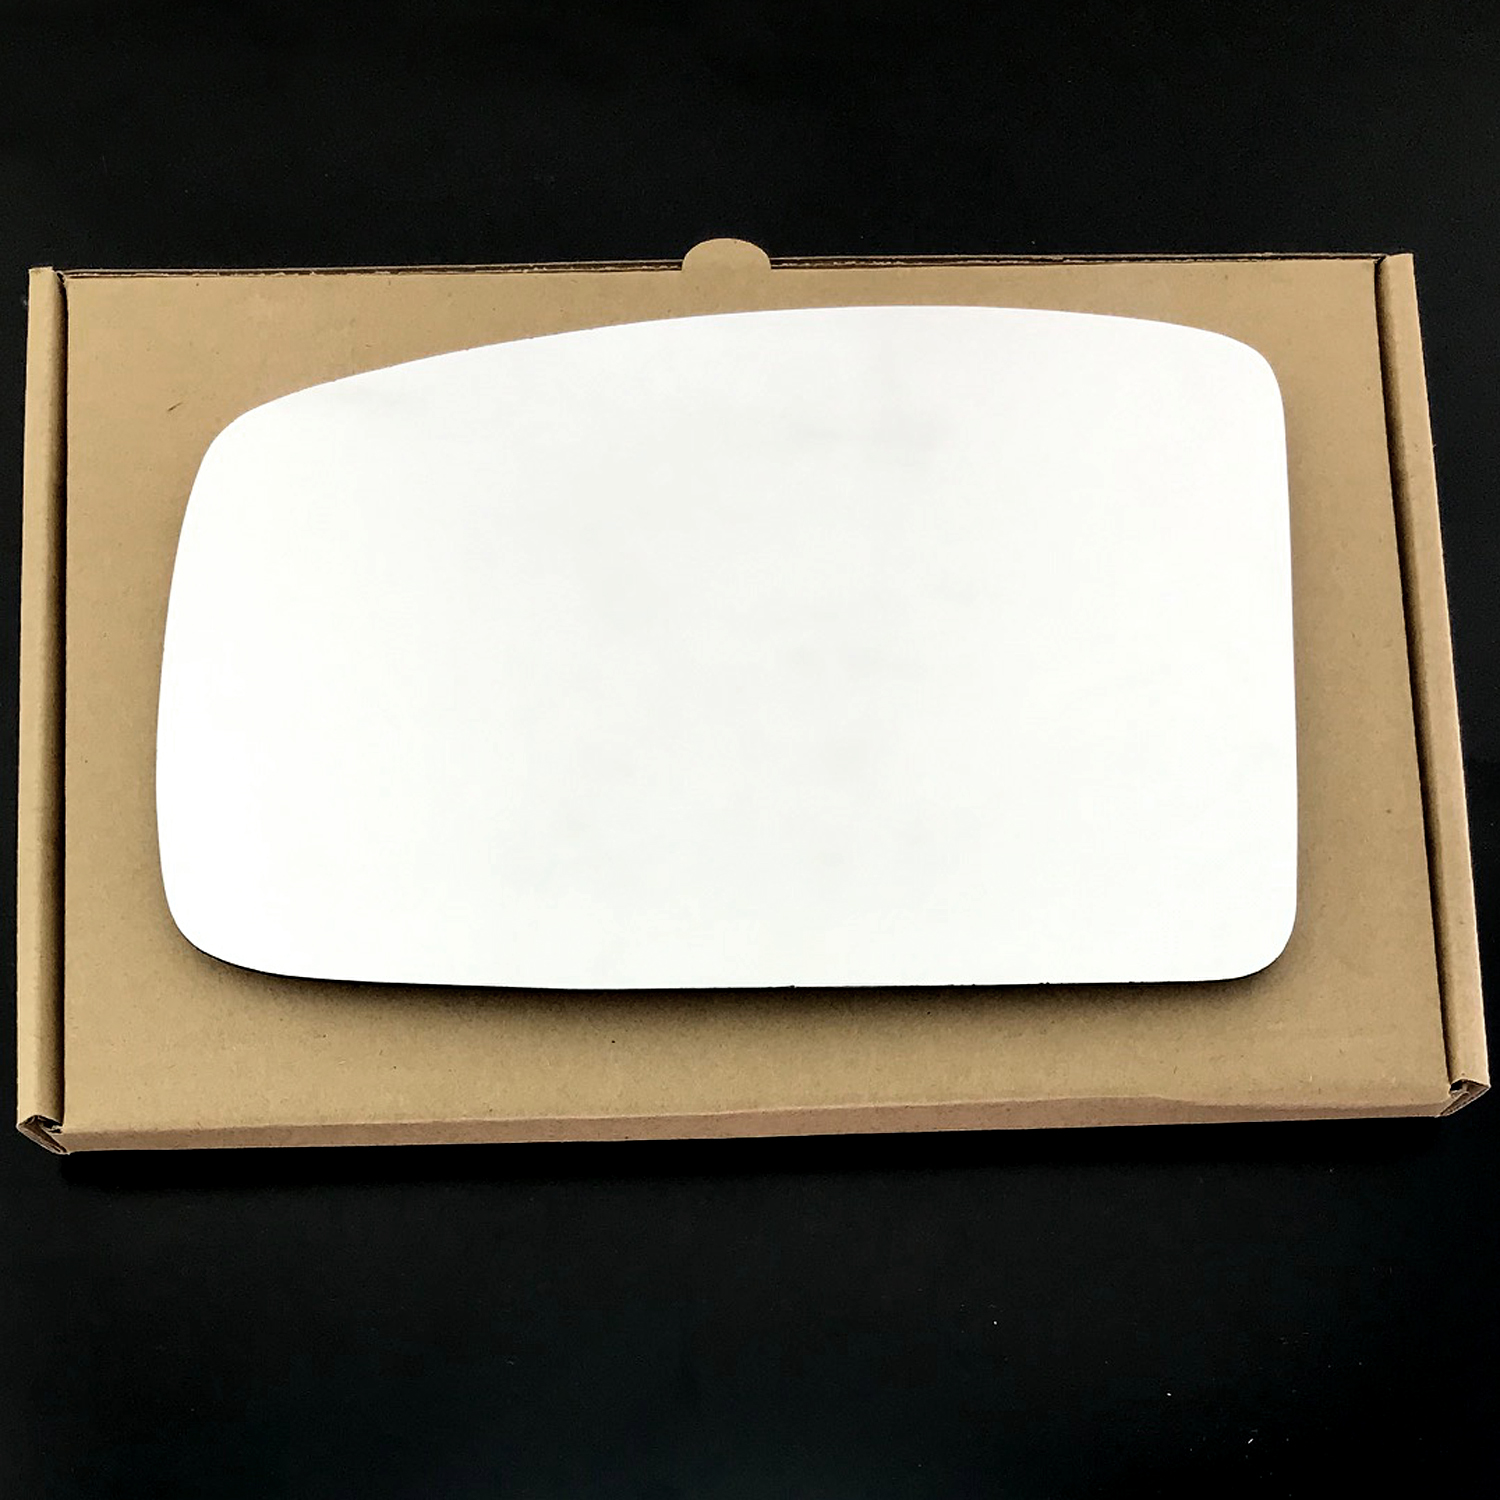 Vauxhall Movano Wing Mirror Glass RIGHT HAND ( UK Driver Side ) 1999 to 2010 – Convex Wing Mirror